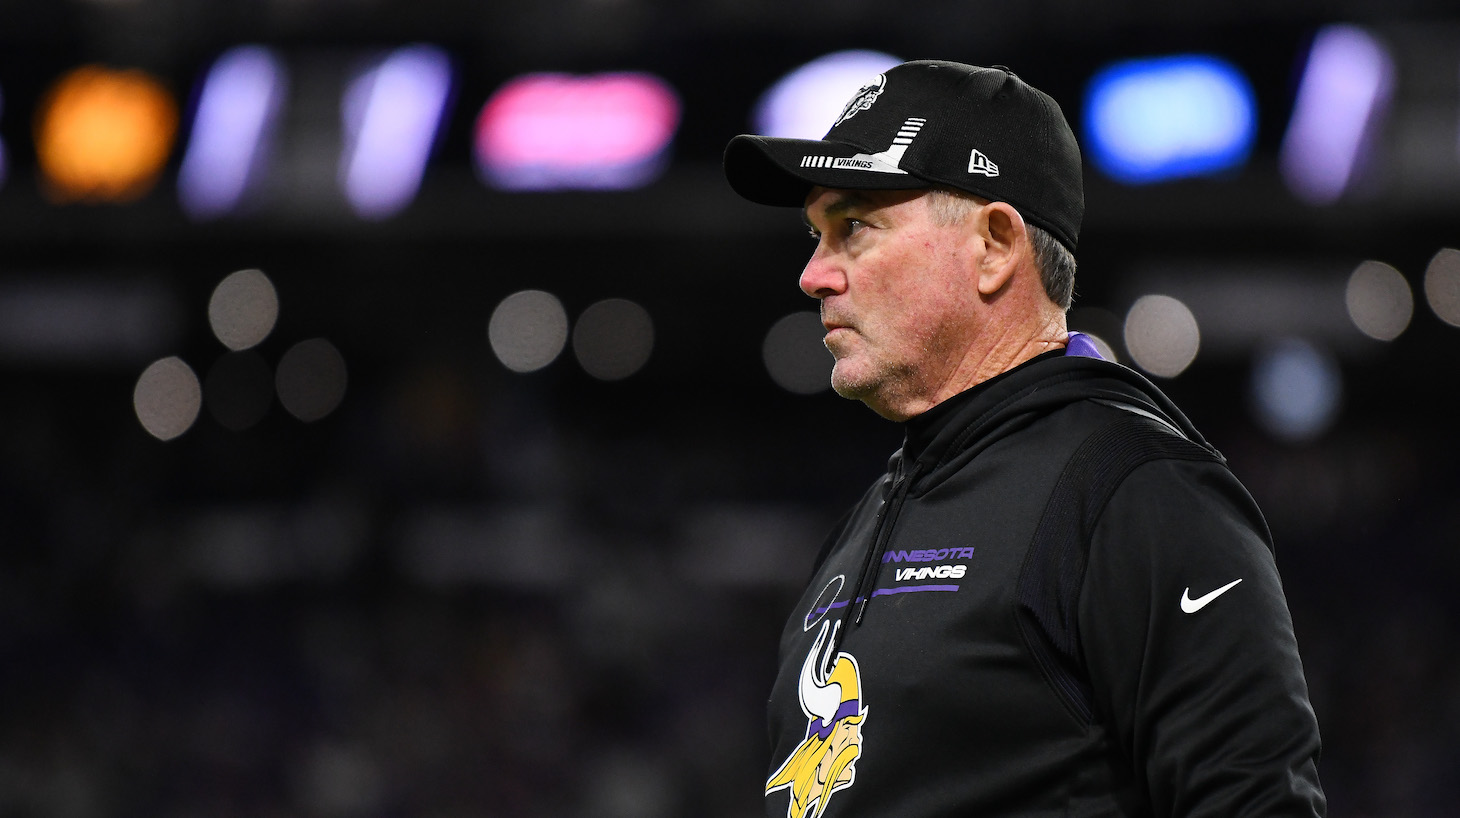 MINNEAPOLIS, MINNESOTA - OCTOBER 31: Head coach Mike Zimmer of the Minnesota Vikings looks on prior to the game against the Dallas Cowboys at U.S. Bank Stadium on October 31, 2021 in Minneapolis, Minnesota. (Photo by Stephen Maturen/Getty Images)